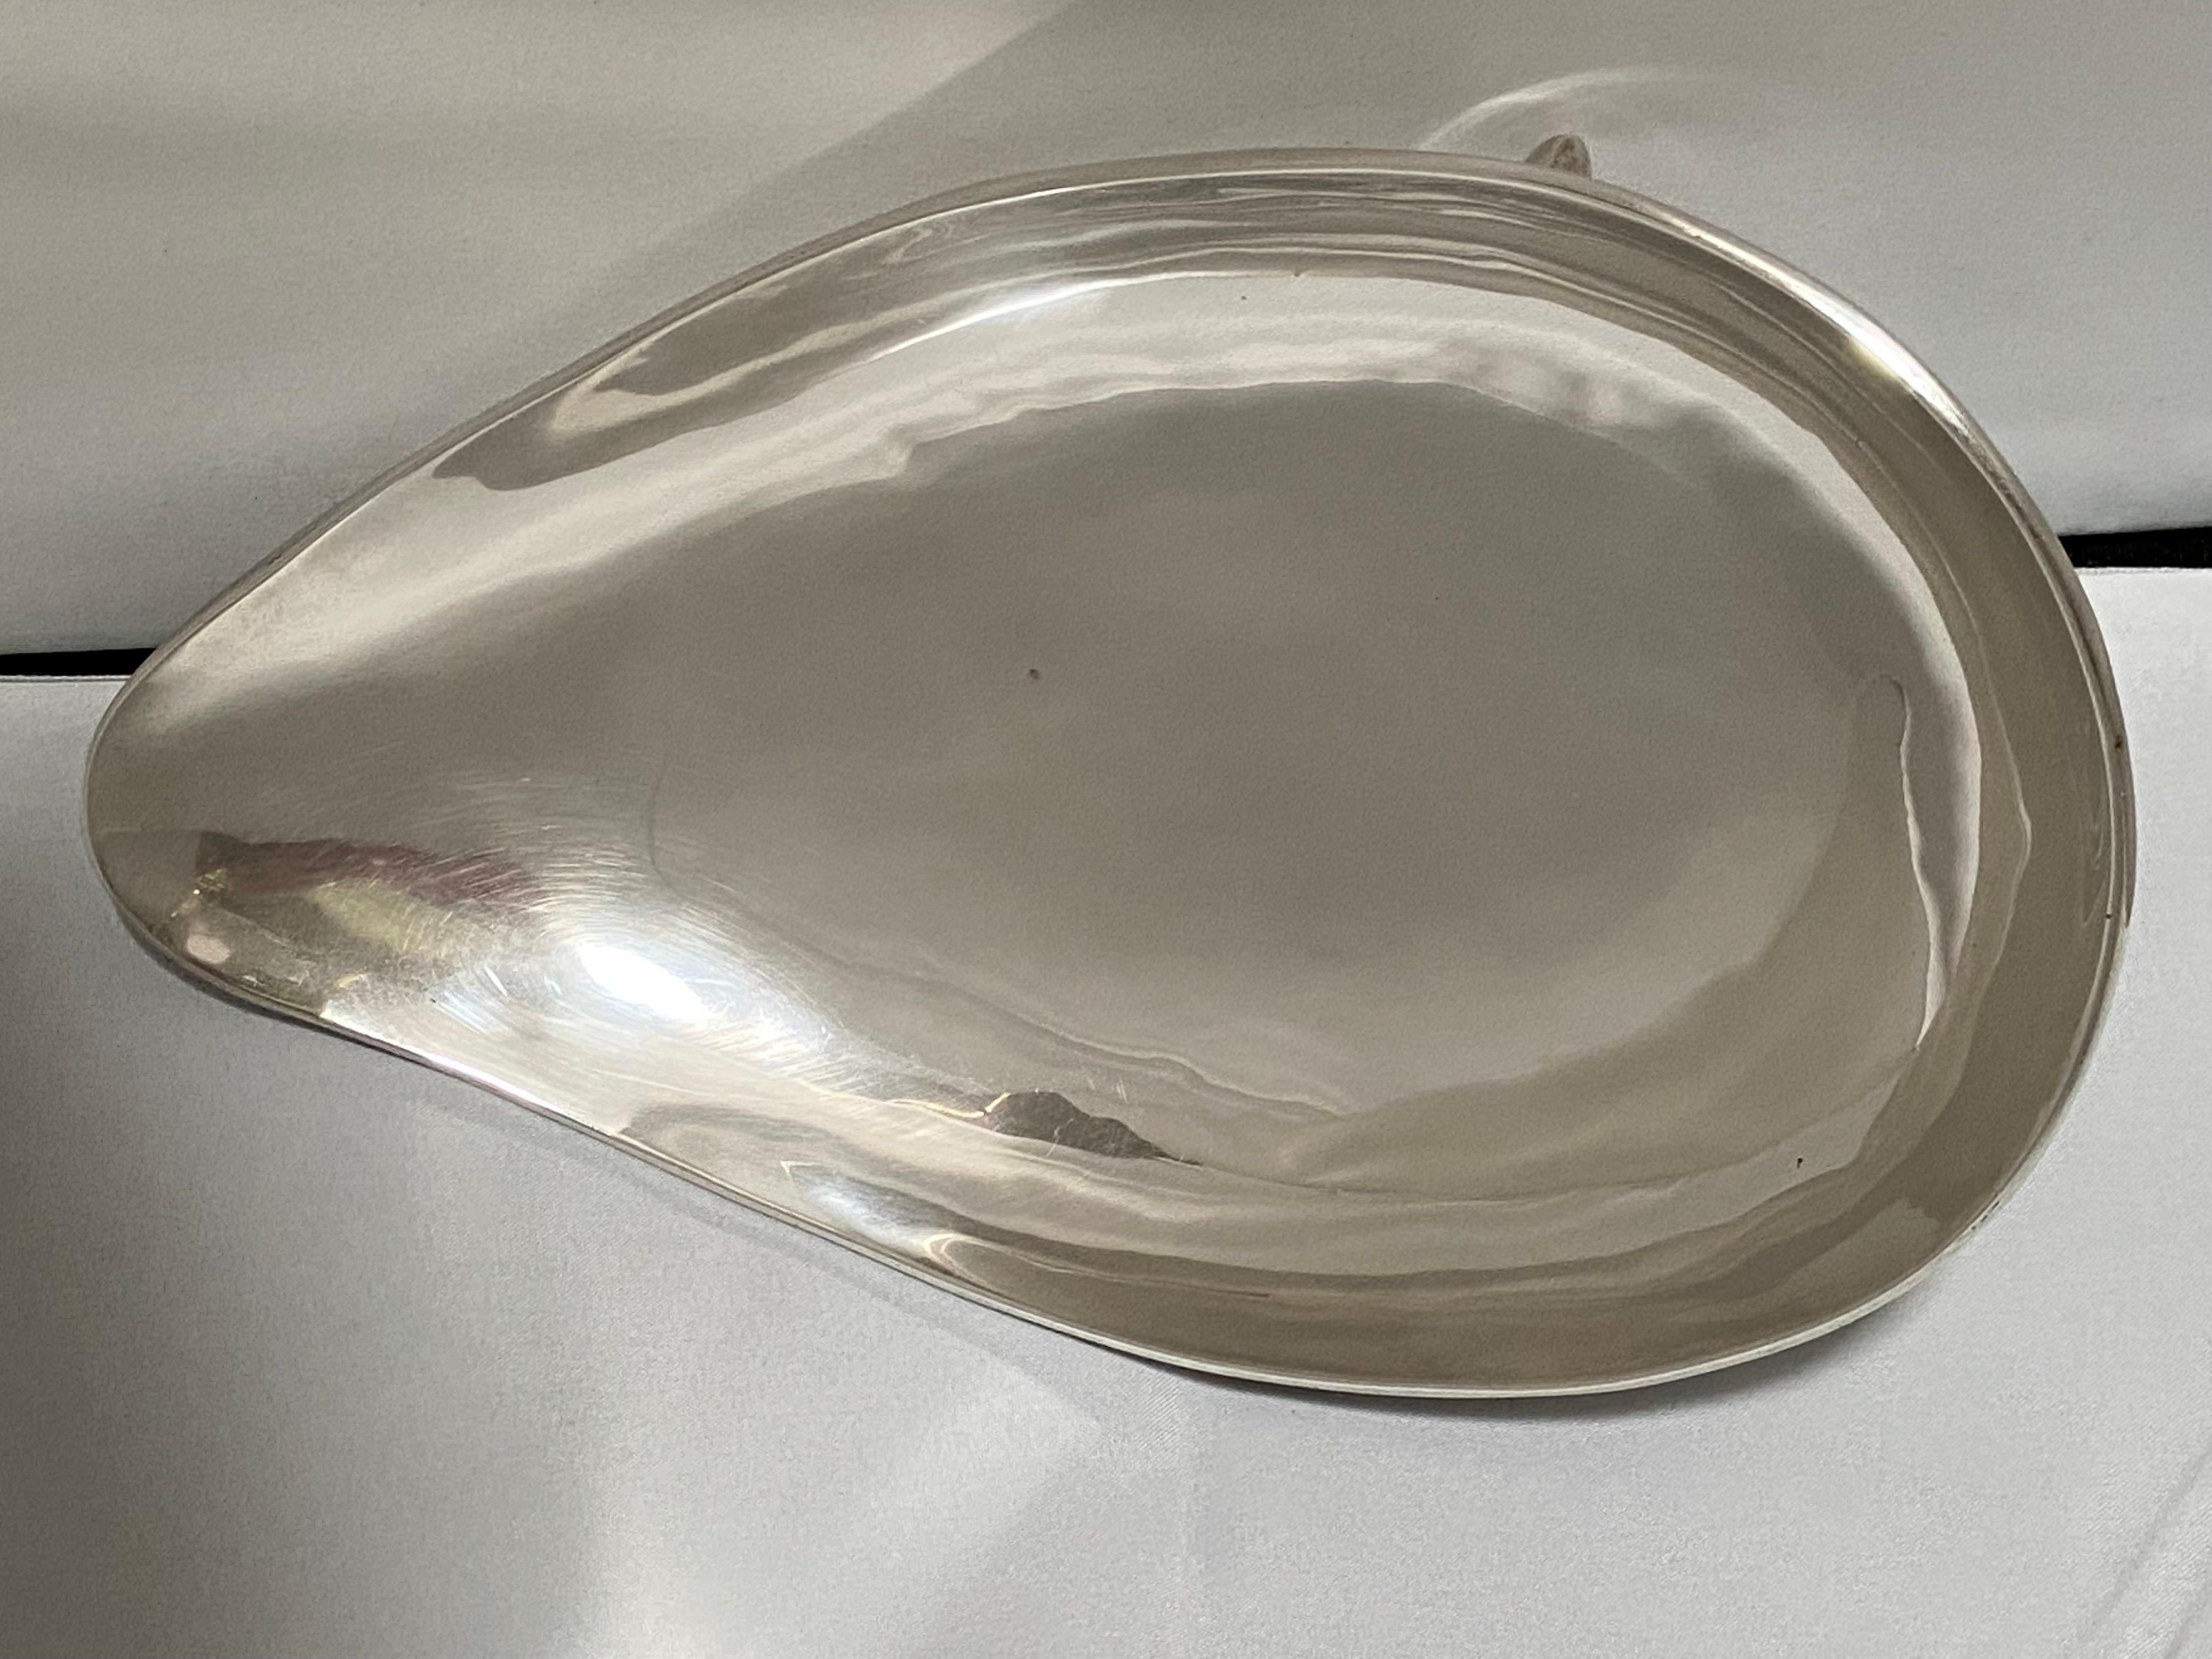 Vintage Mexican Mid-Century Modern Sterling Silver Footed Bowl or Dish by Zurita For Sale 3